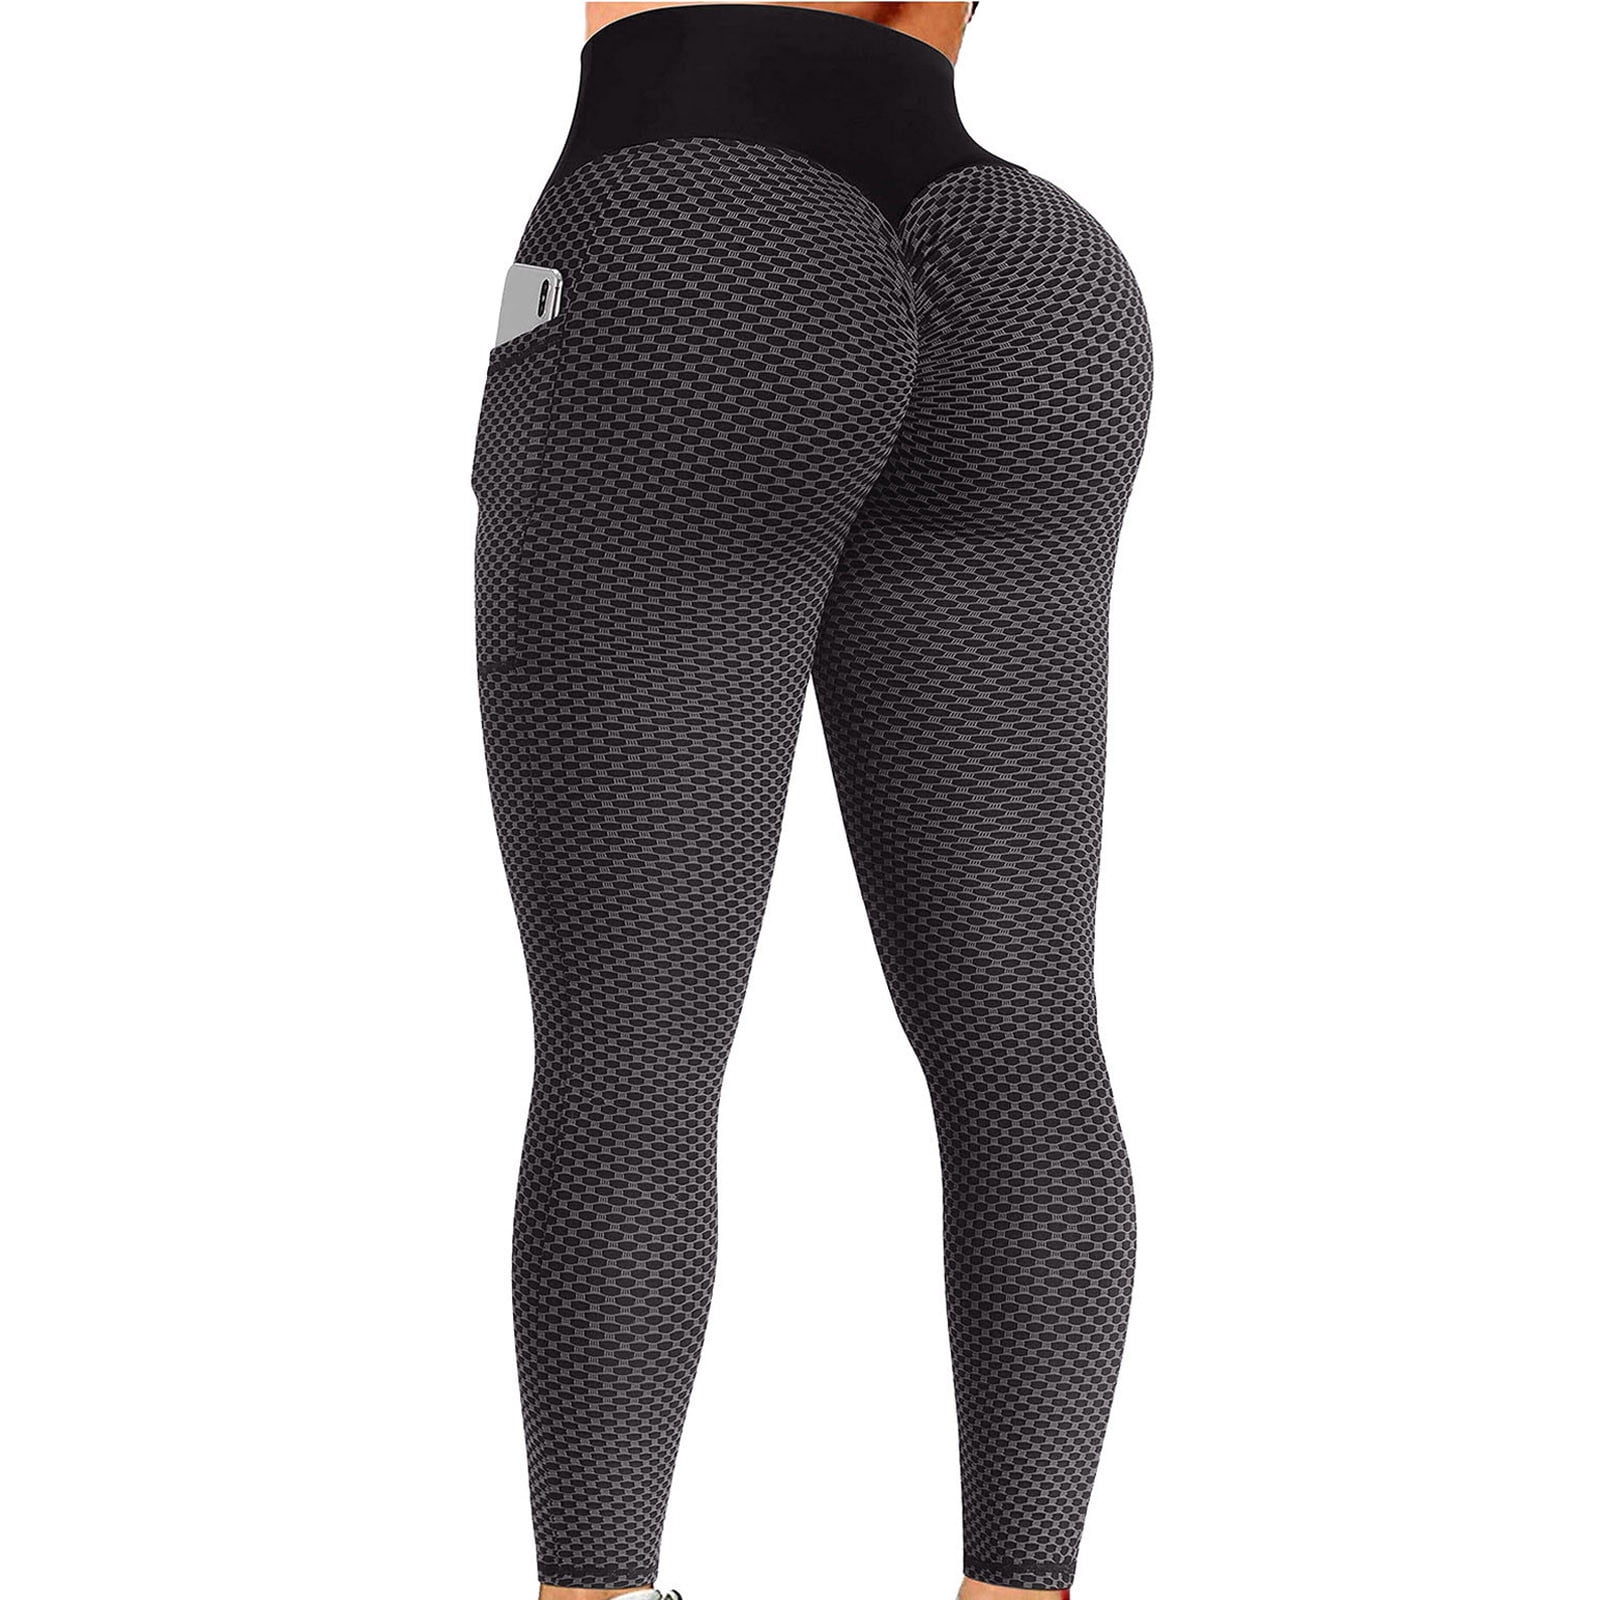 Women High Waist Yoga Pants with Pocket,HOMEBABY Ladies Sports Workout Gym Fitness Exercise Jumpsuit Athletic Skinny Running Leggings Girls Slim Running Clothes Fitness Stretch Trouser 